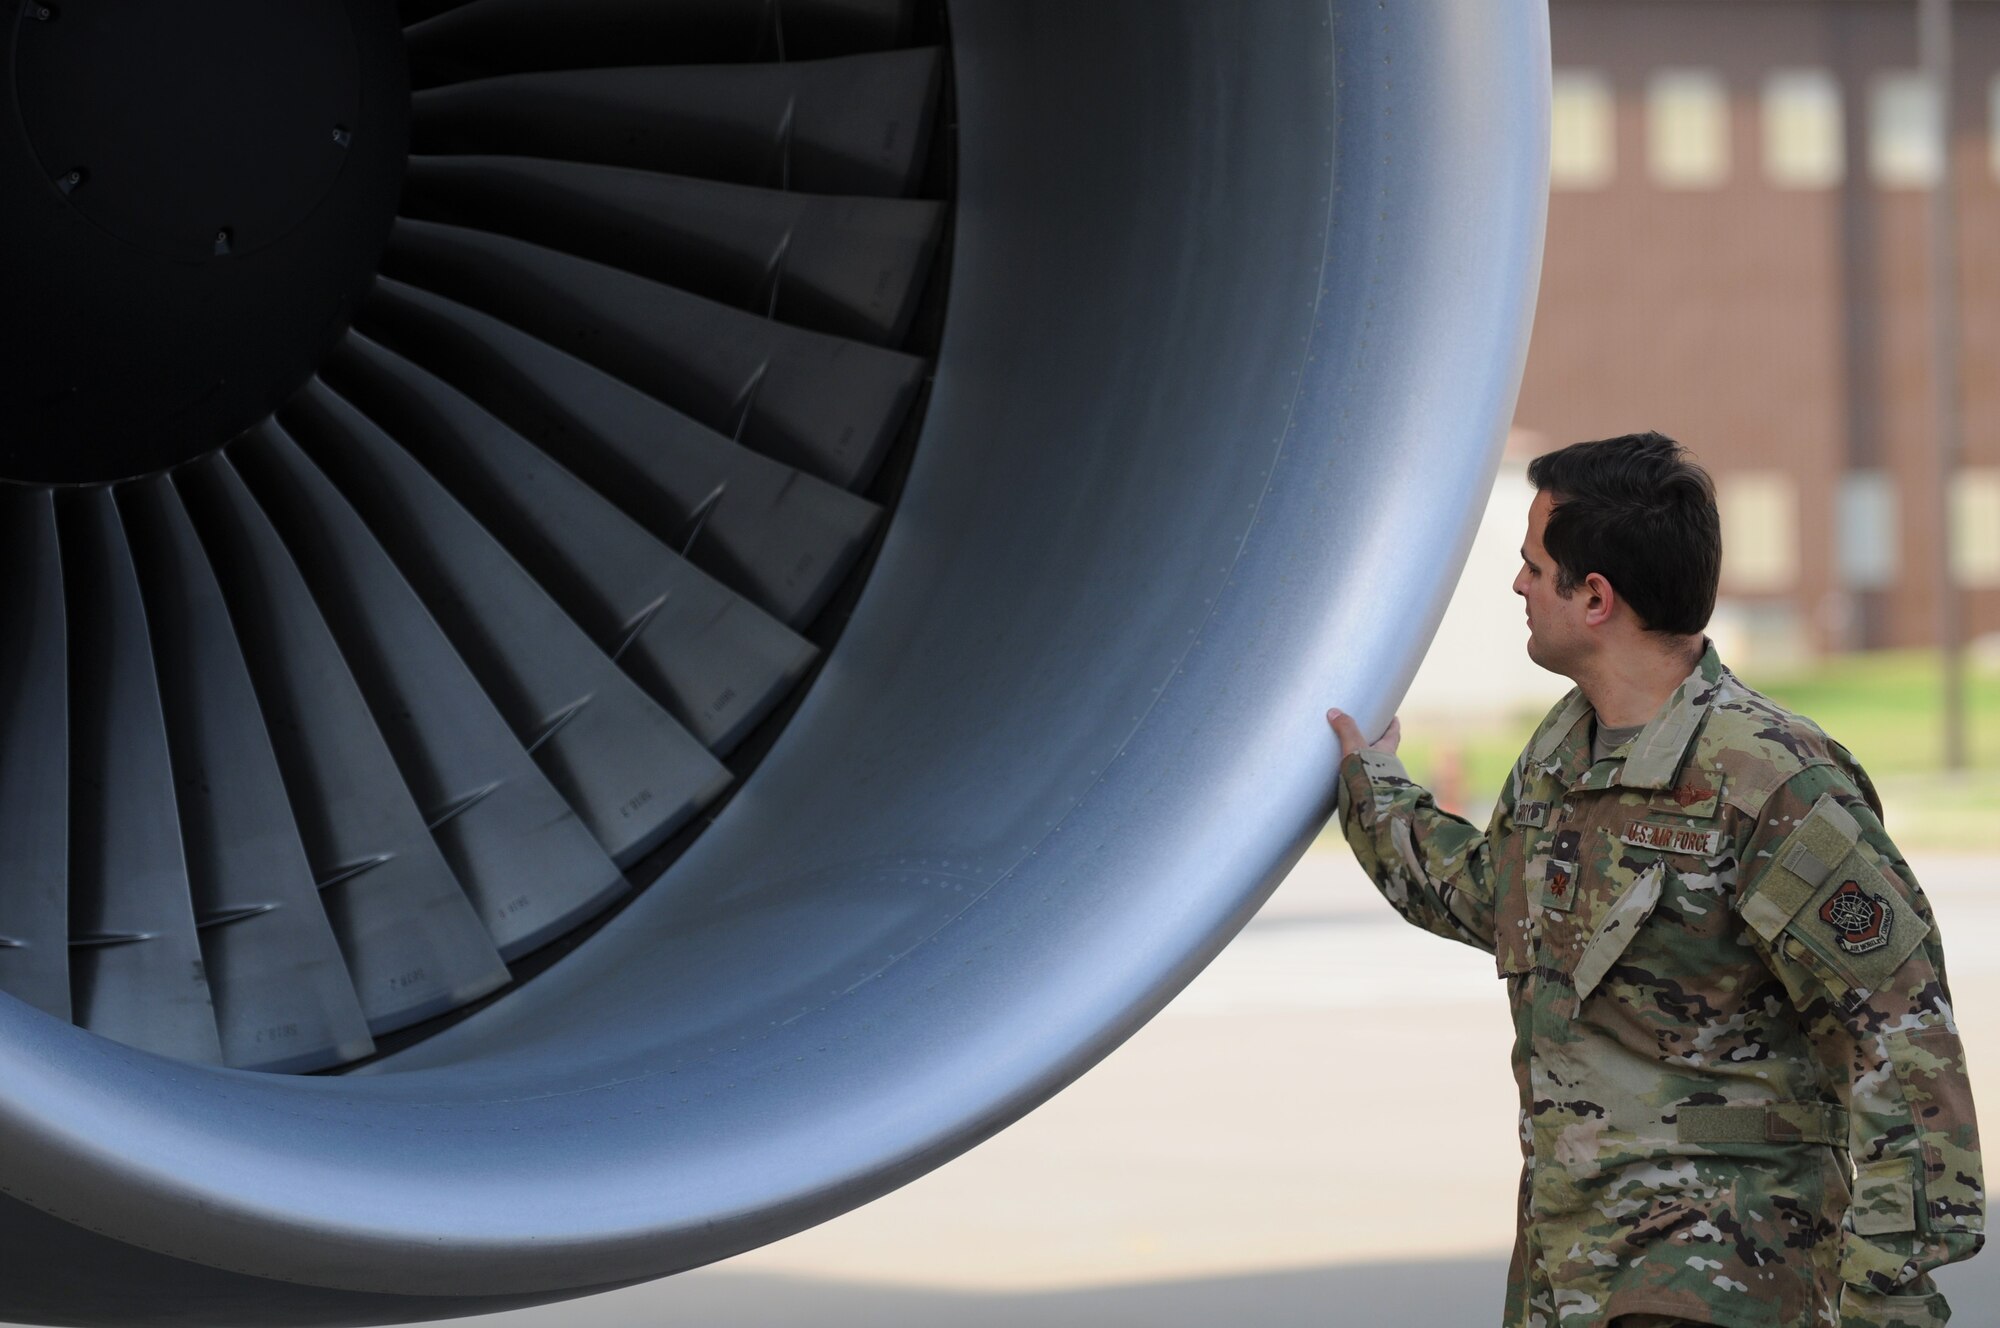 Maj. Tony Gorry, 344th Air Refueling Squadron chief of group training, performs a preflight inspection on a KC-46A Pegasus April 21, 2020, at McConnell Air Force Base, Kansas. Preflight inspections require aircrews to perform visual checks of controls and instruments prior to starting engines. Aircrew prepared to execute the Air Force’s first night vision operational training mission on the KC-46A Pegasus. (U.S. Air Force photo by Master Sgt. Jerry Fleshman)